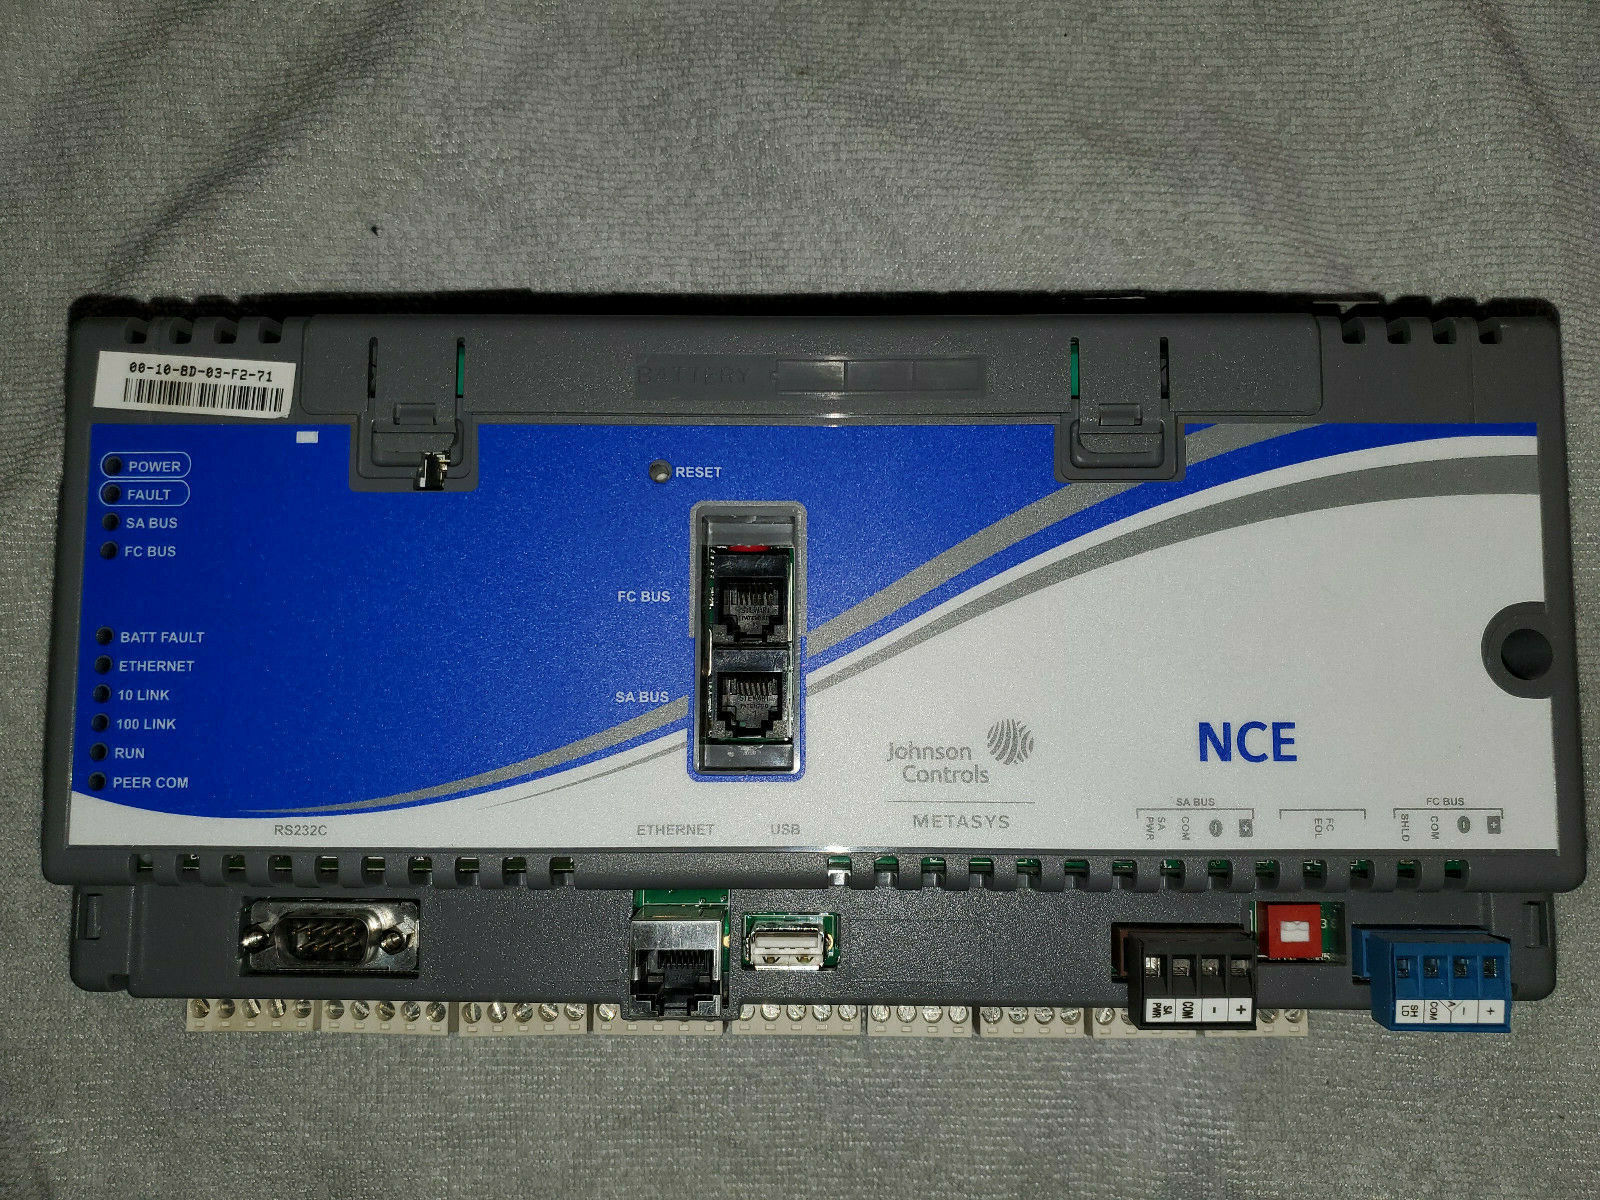 Johnson Controls Metasys MS-NCE2560-0 Network Control Engine NCE w/ DIS Display